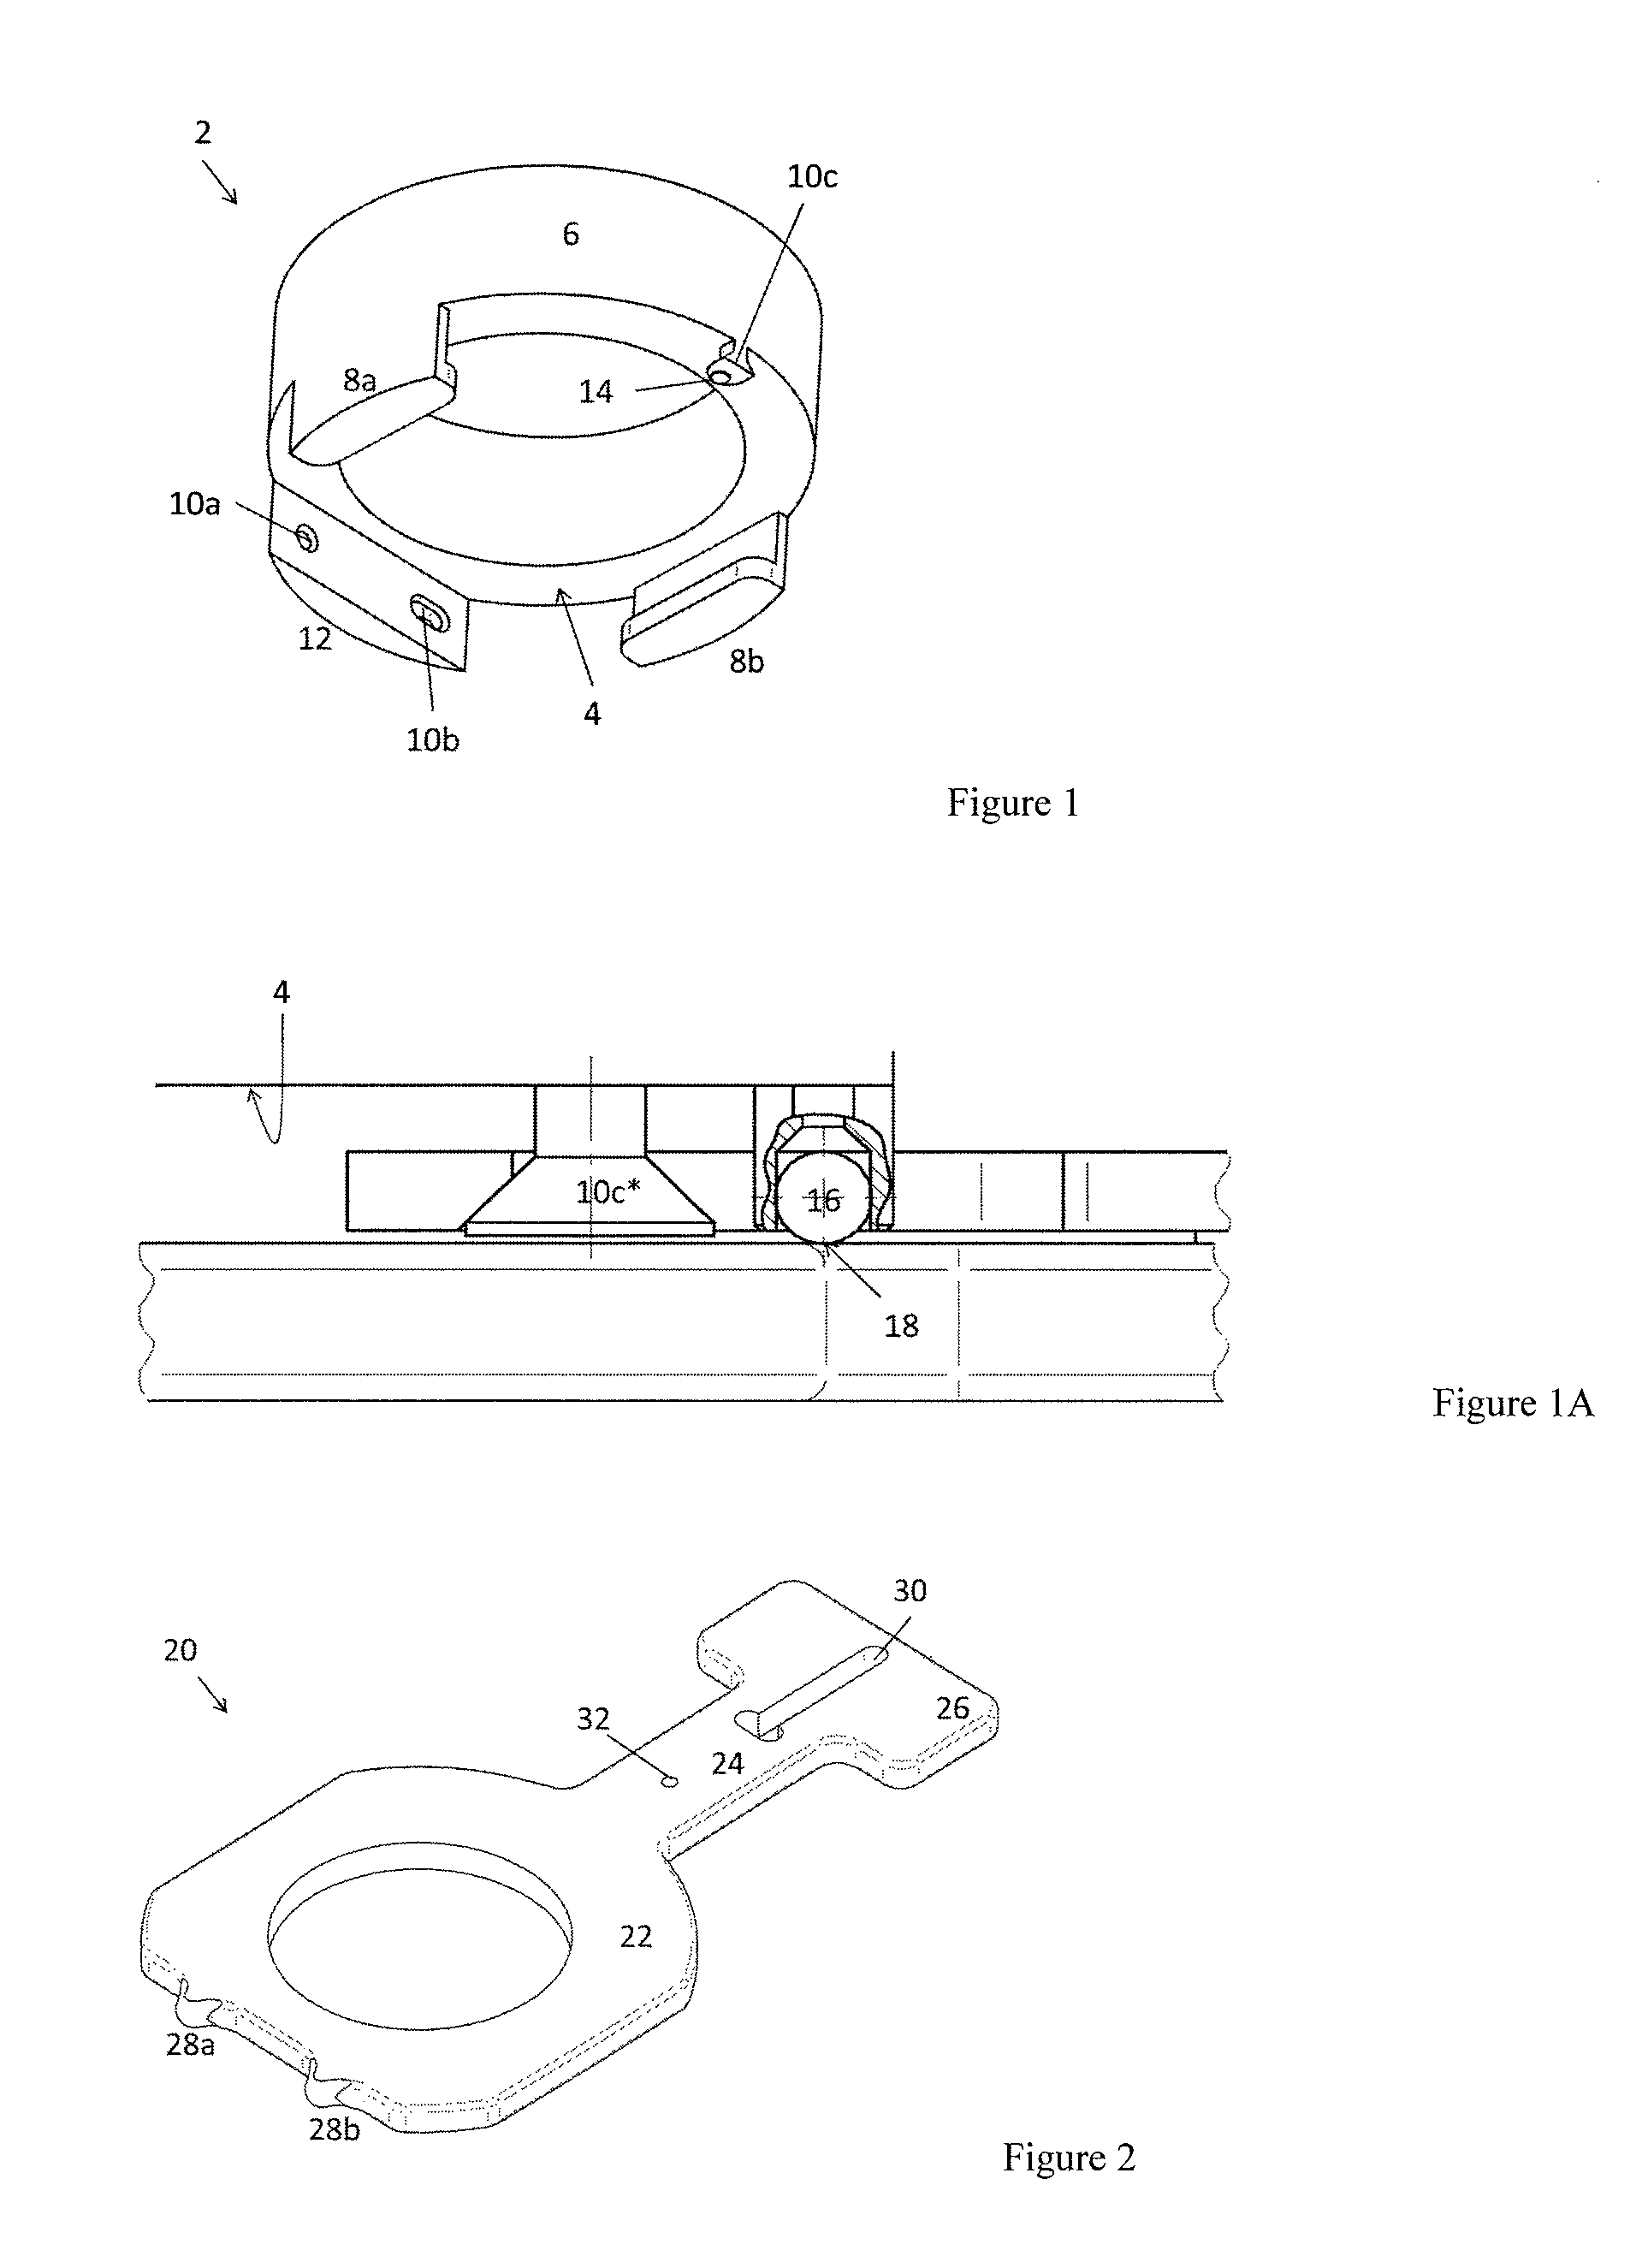 Arrangement for a removable ion-optical assembly in a mass spectrometer